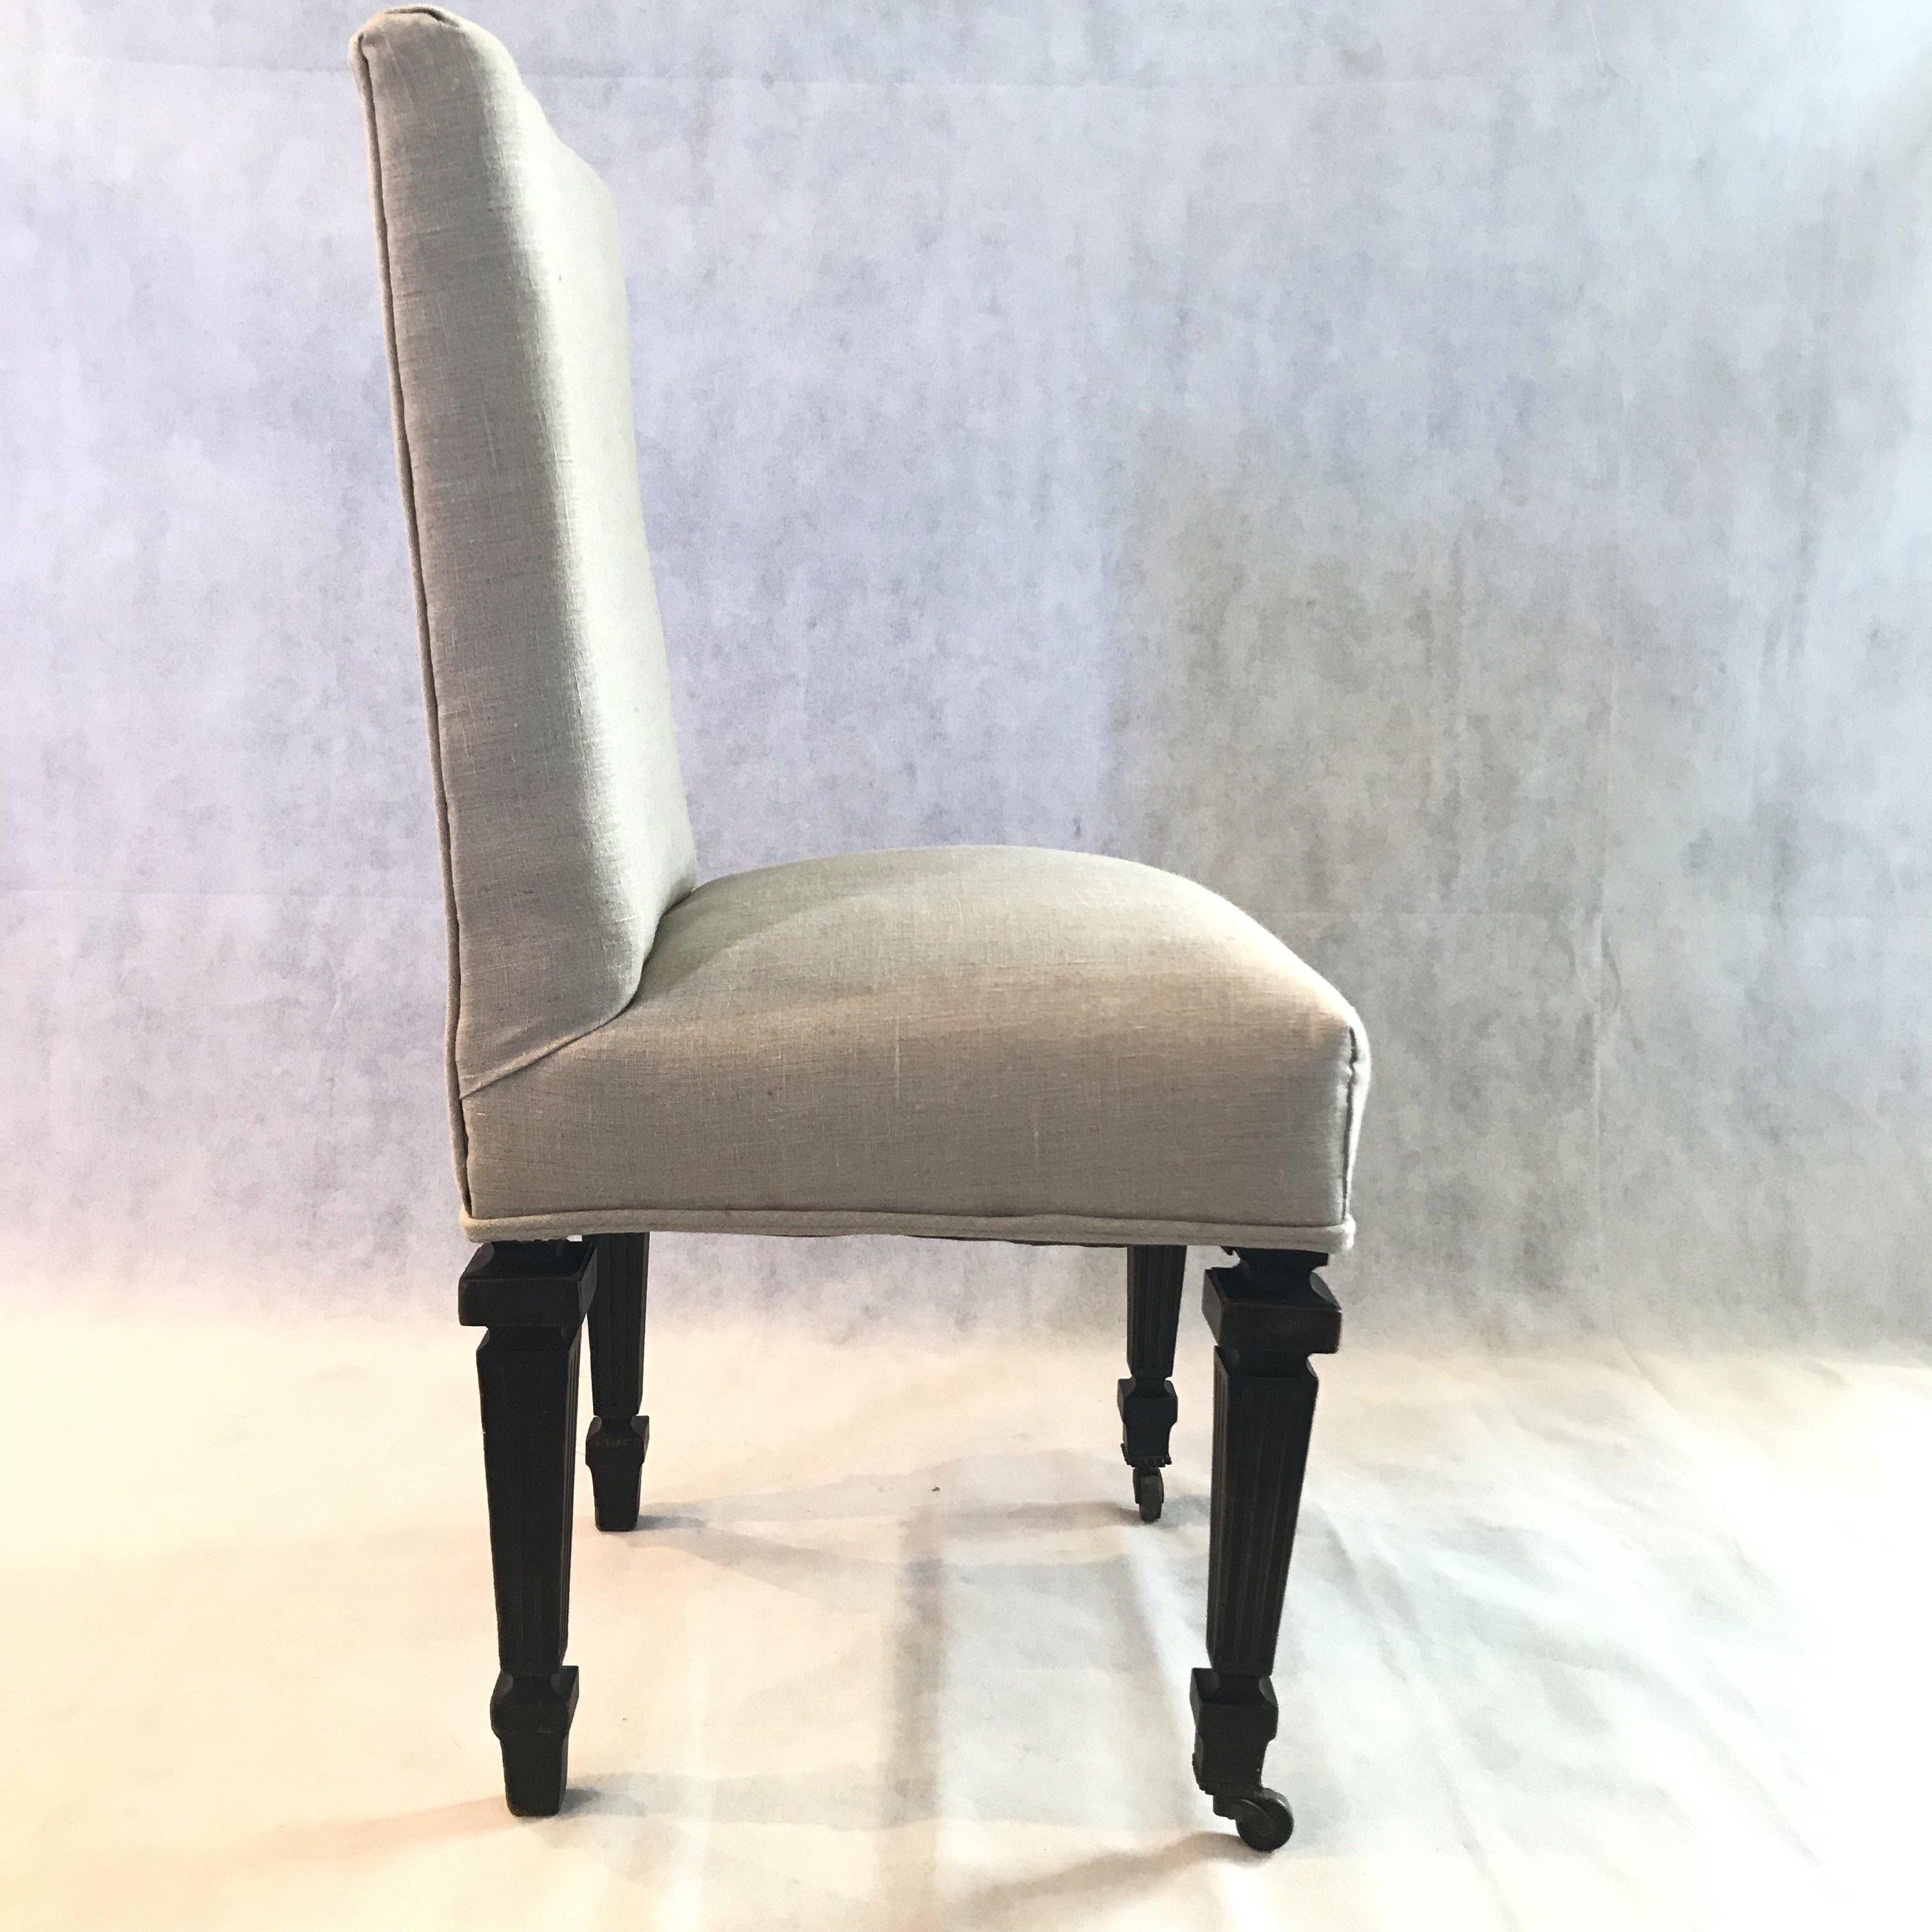 Elegant pair of Napoleon III black french antique chairs having original paint and frame. Front legs have original casters. Bought in Avignon, France. New neutral handsome upholstery.

#1519.